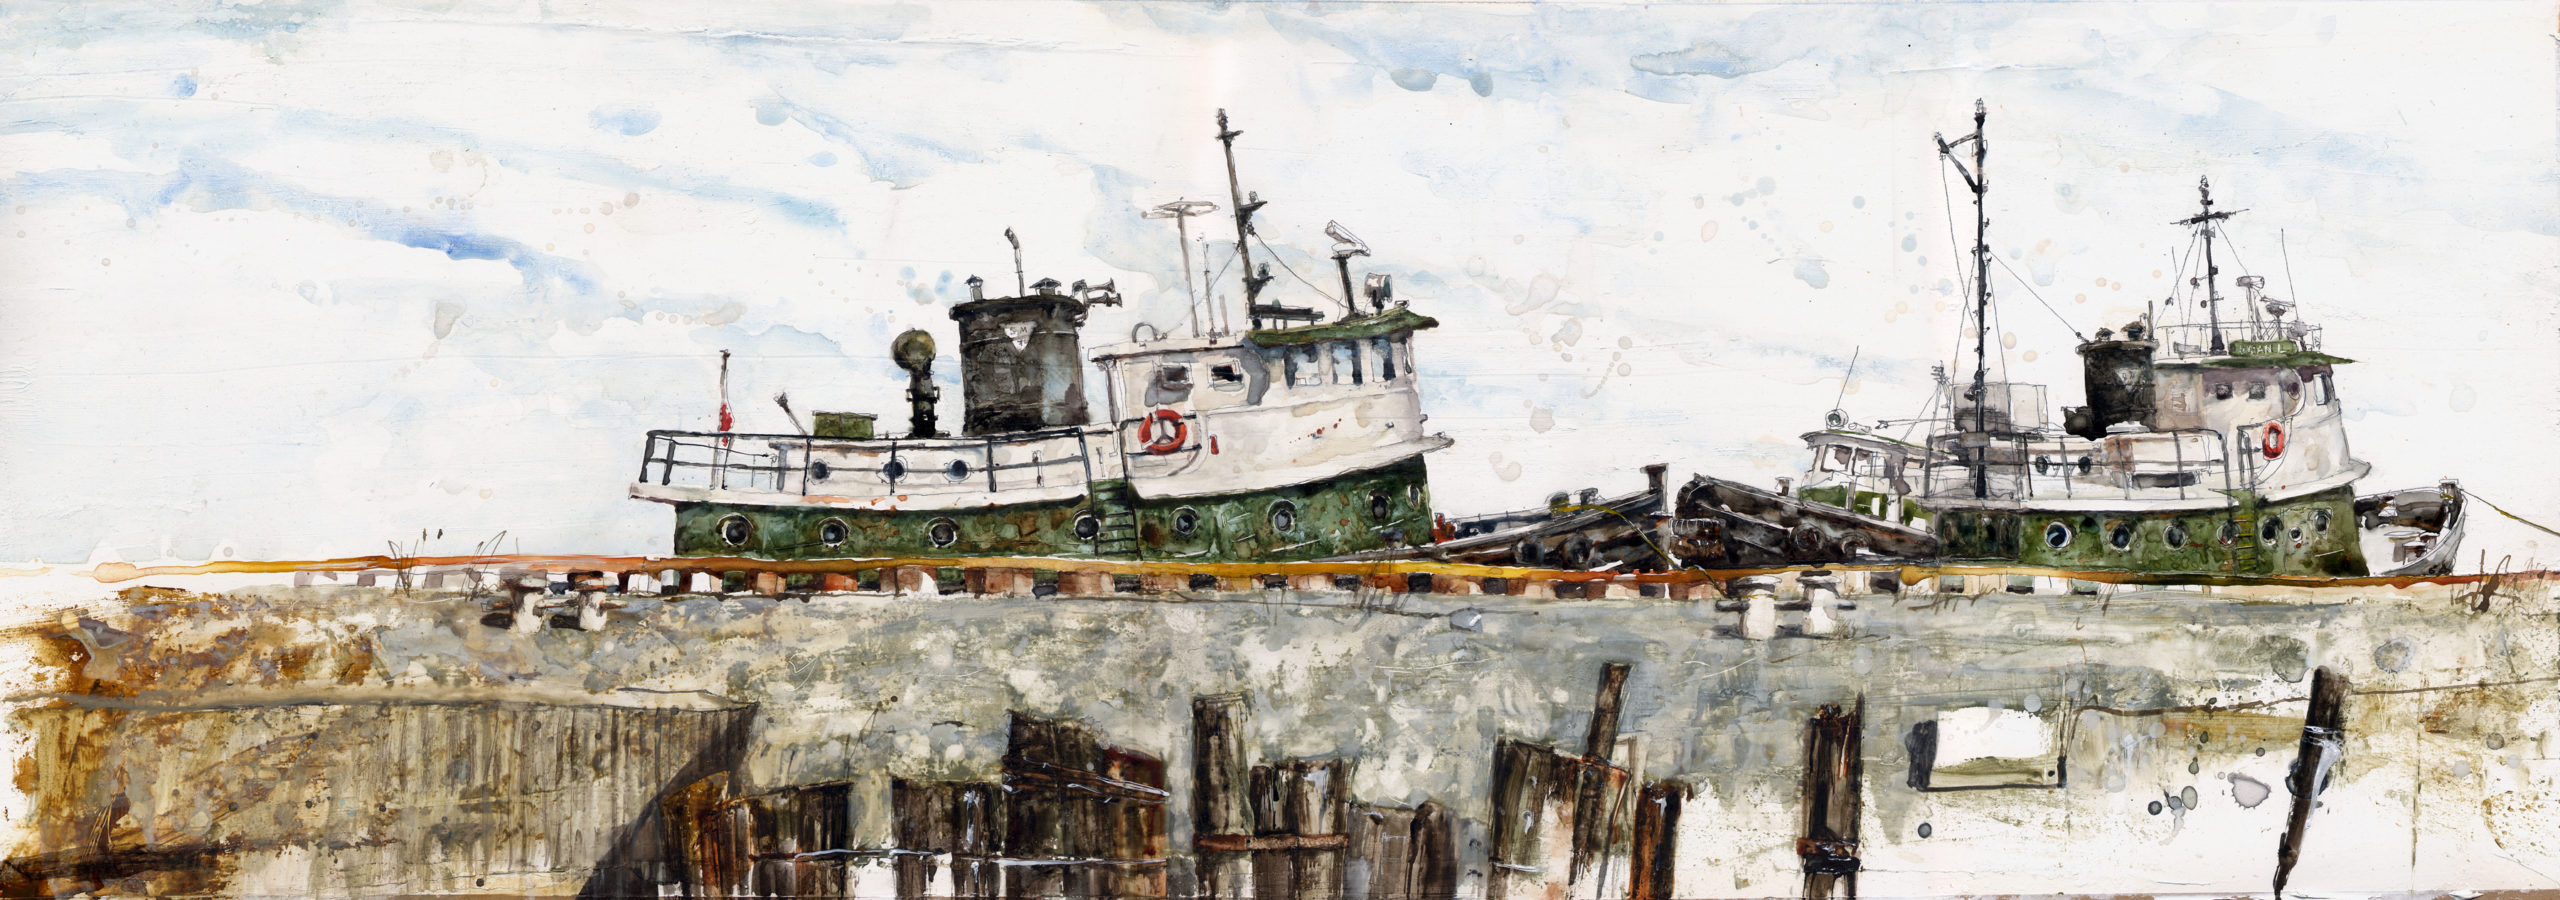 Mat Barber Kennedy, "Green Tugs at Sturgeon Bay," 2016, mixed water-based media, 10 x 25 in., Collection the artist, Studio based on plein air studies